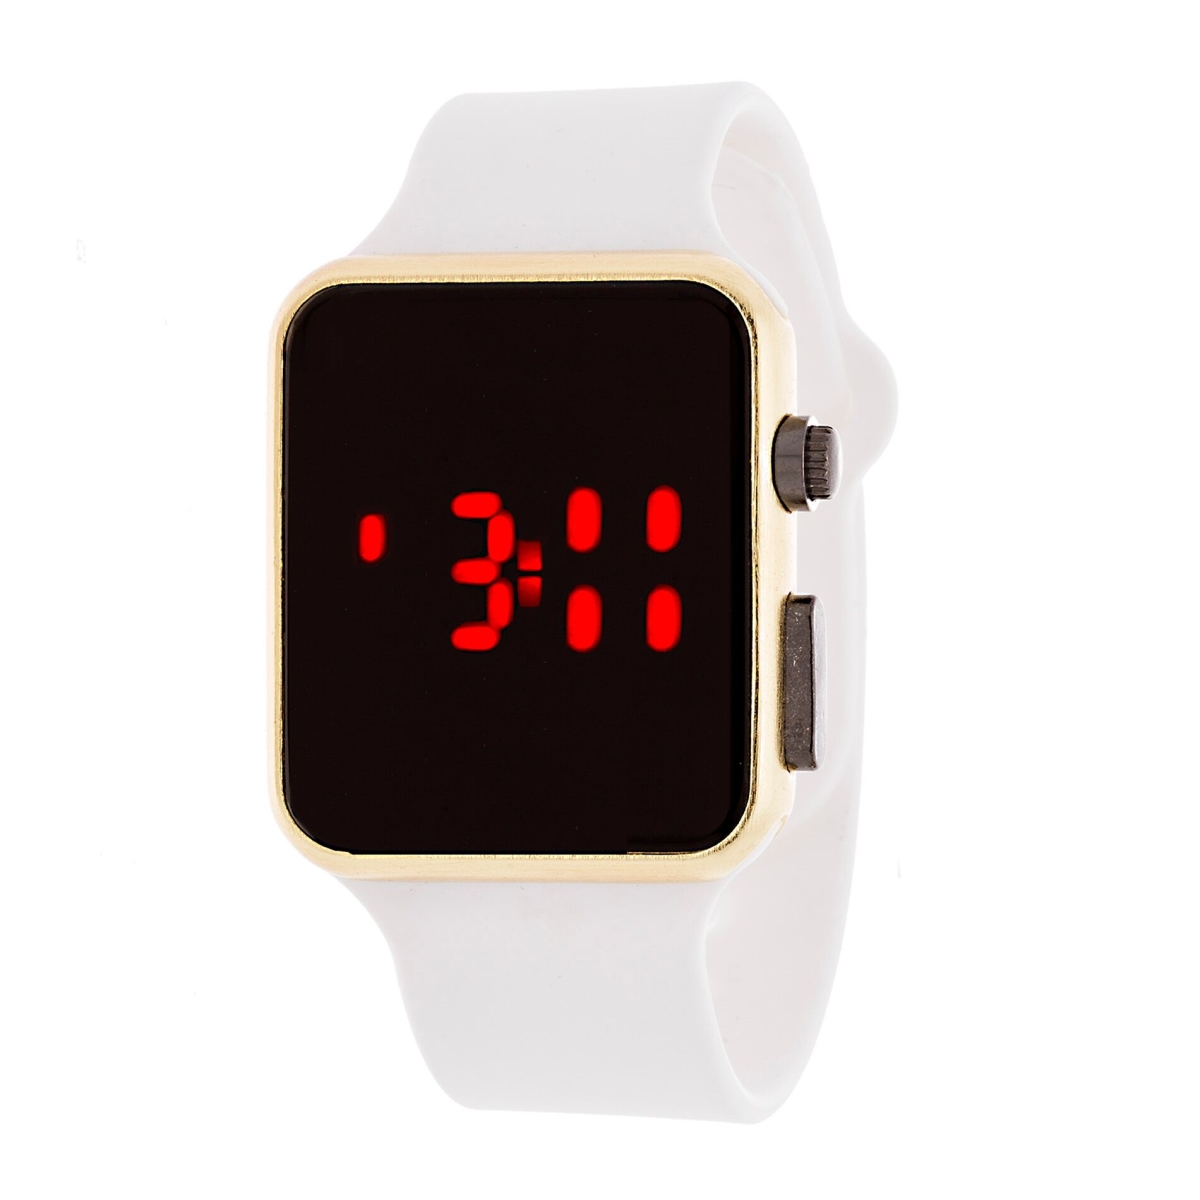 Nwr424206g-wt Digital Watch With Square Dail, Rubber Strap & Led Display, White